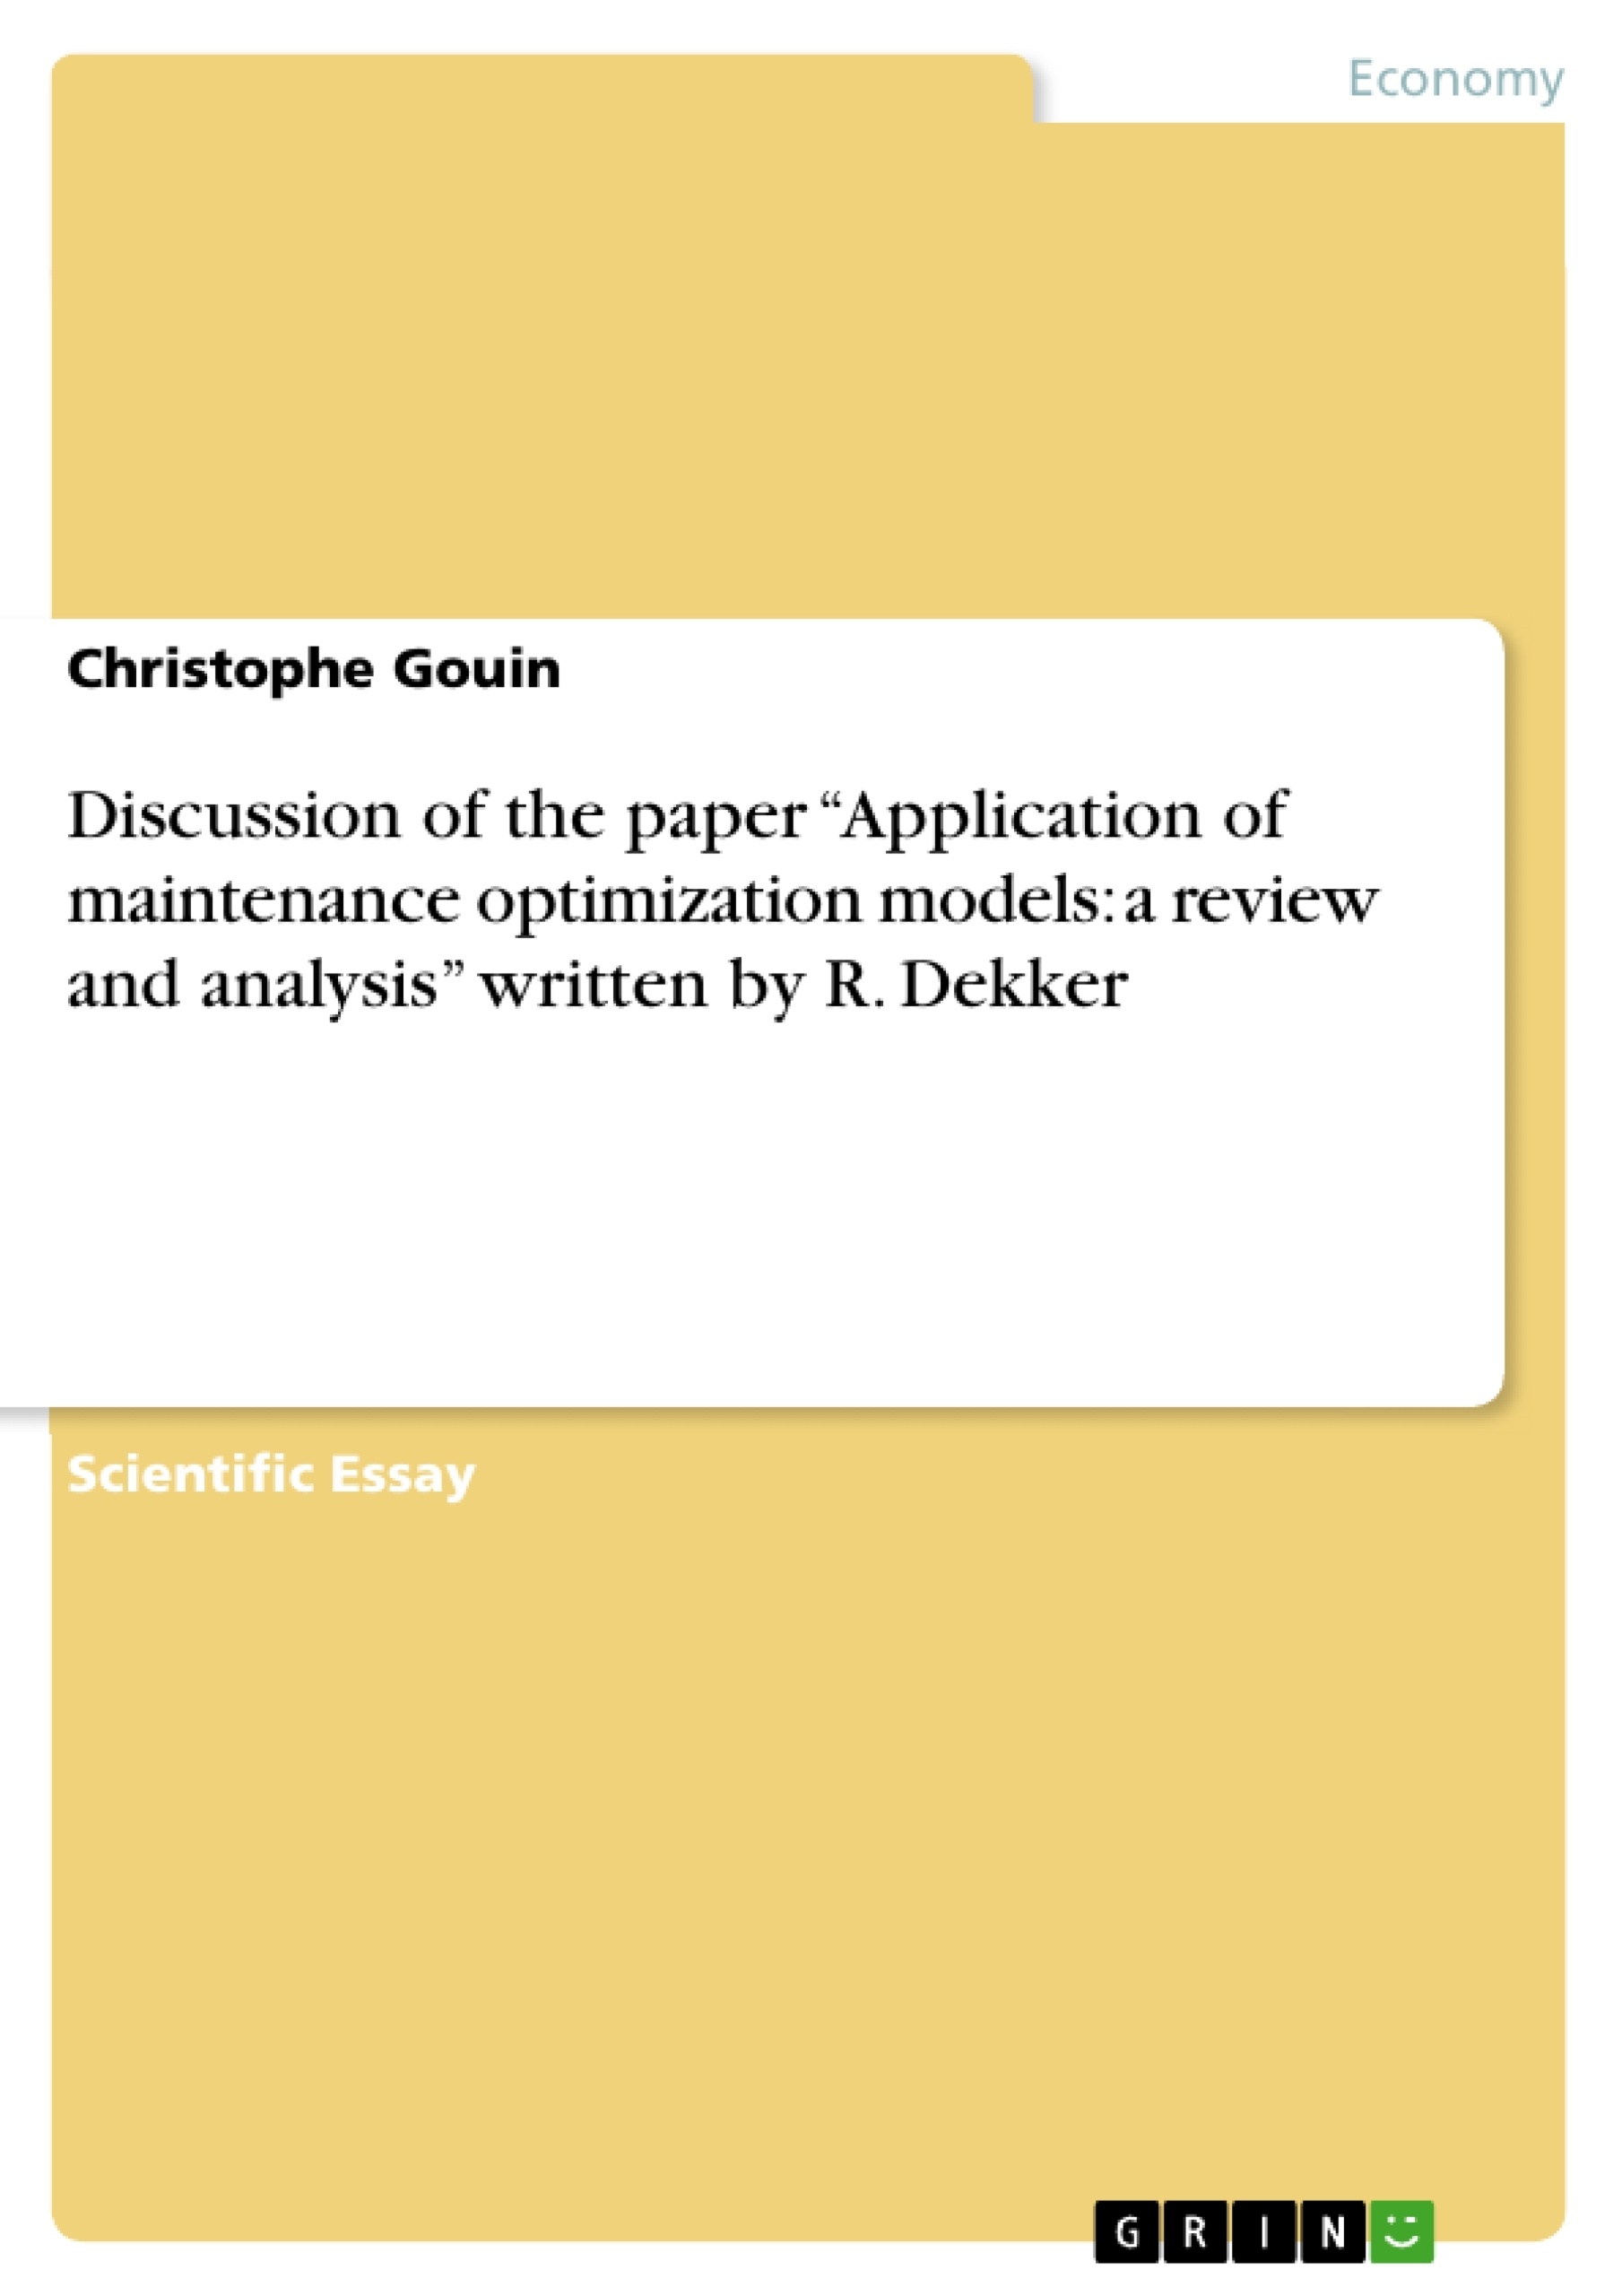 Title: Discussion of the paper “Application of maintenance optimization models: a review and analysis” written by R. Dekker